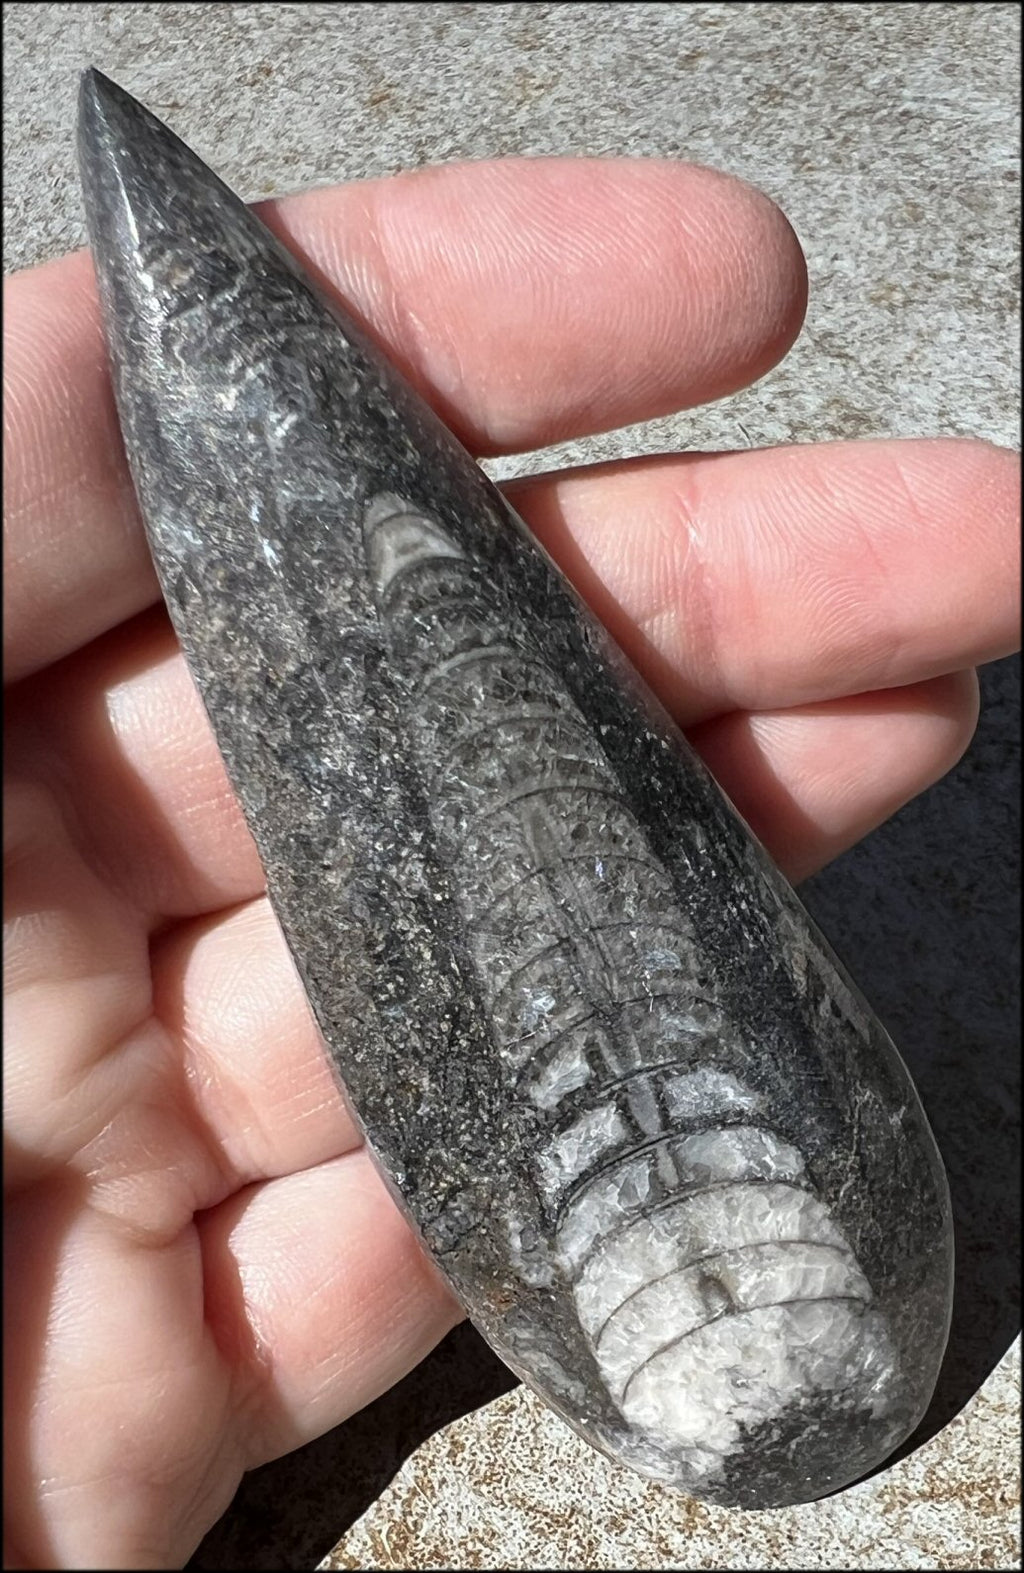 Polished Orthoceras Fossil from Morocco - Open to change, Let go of old programs